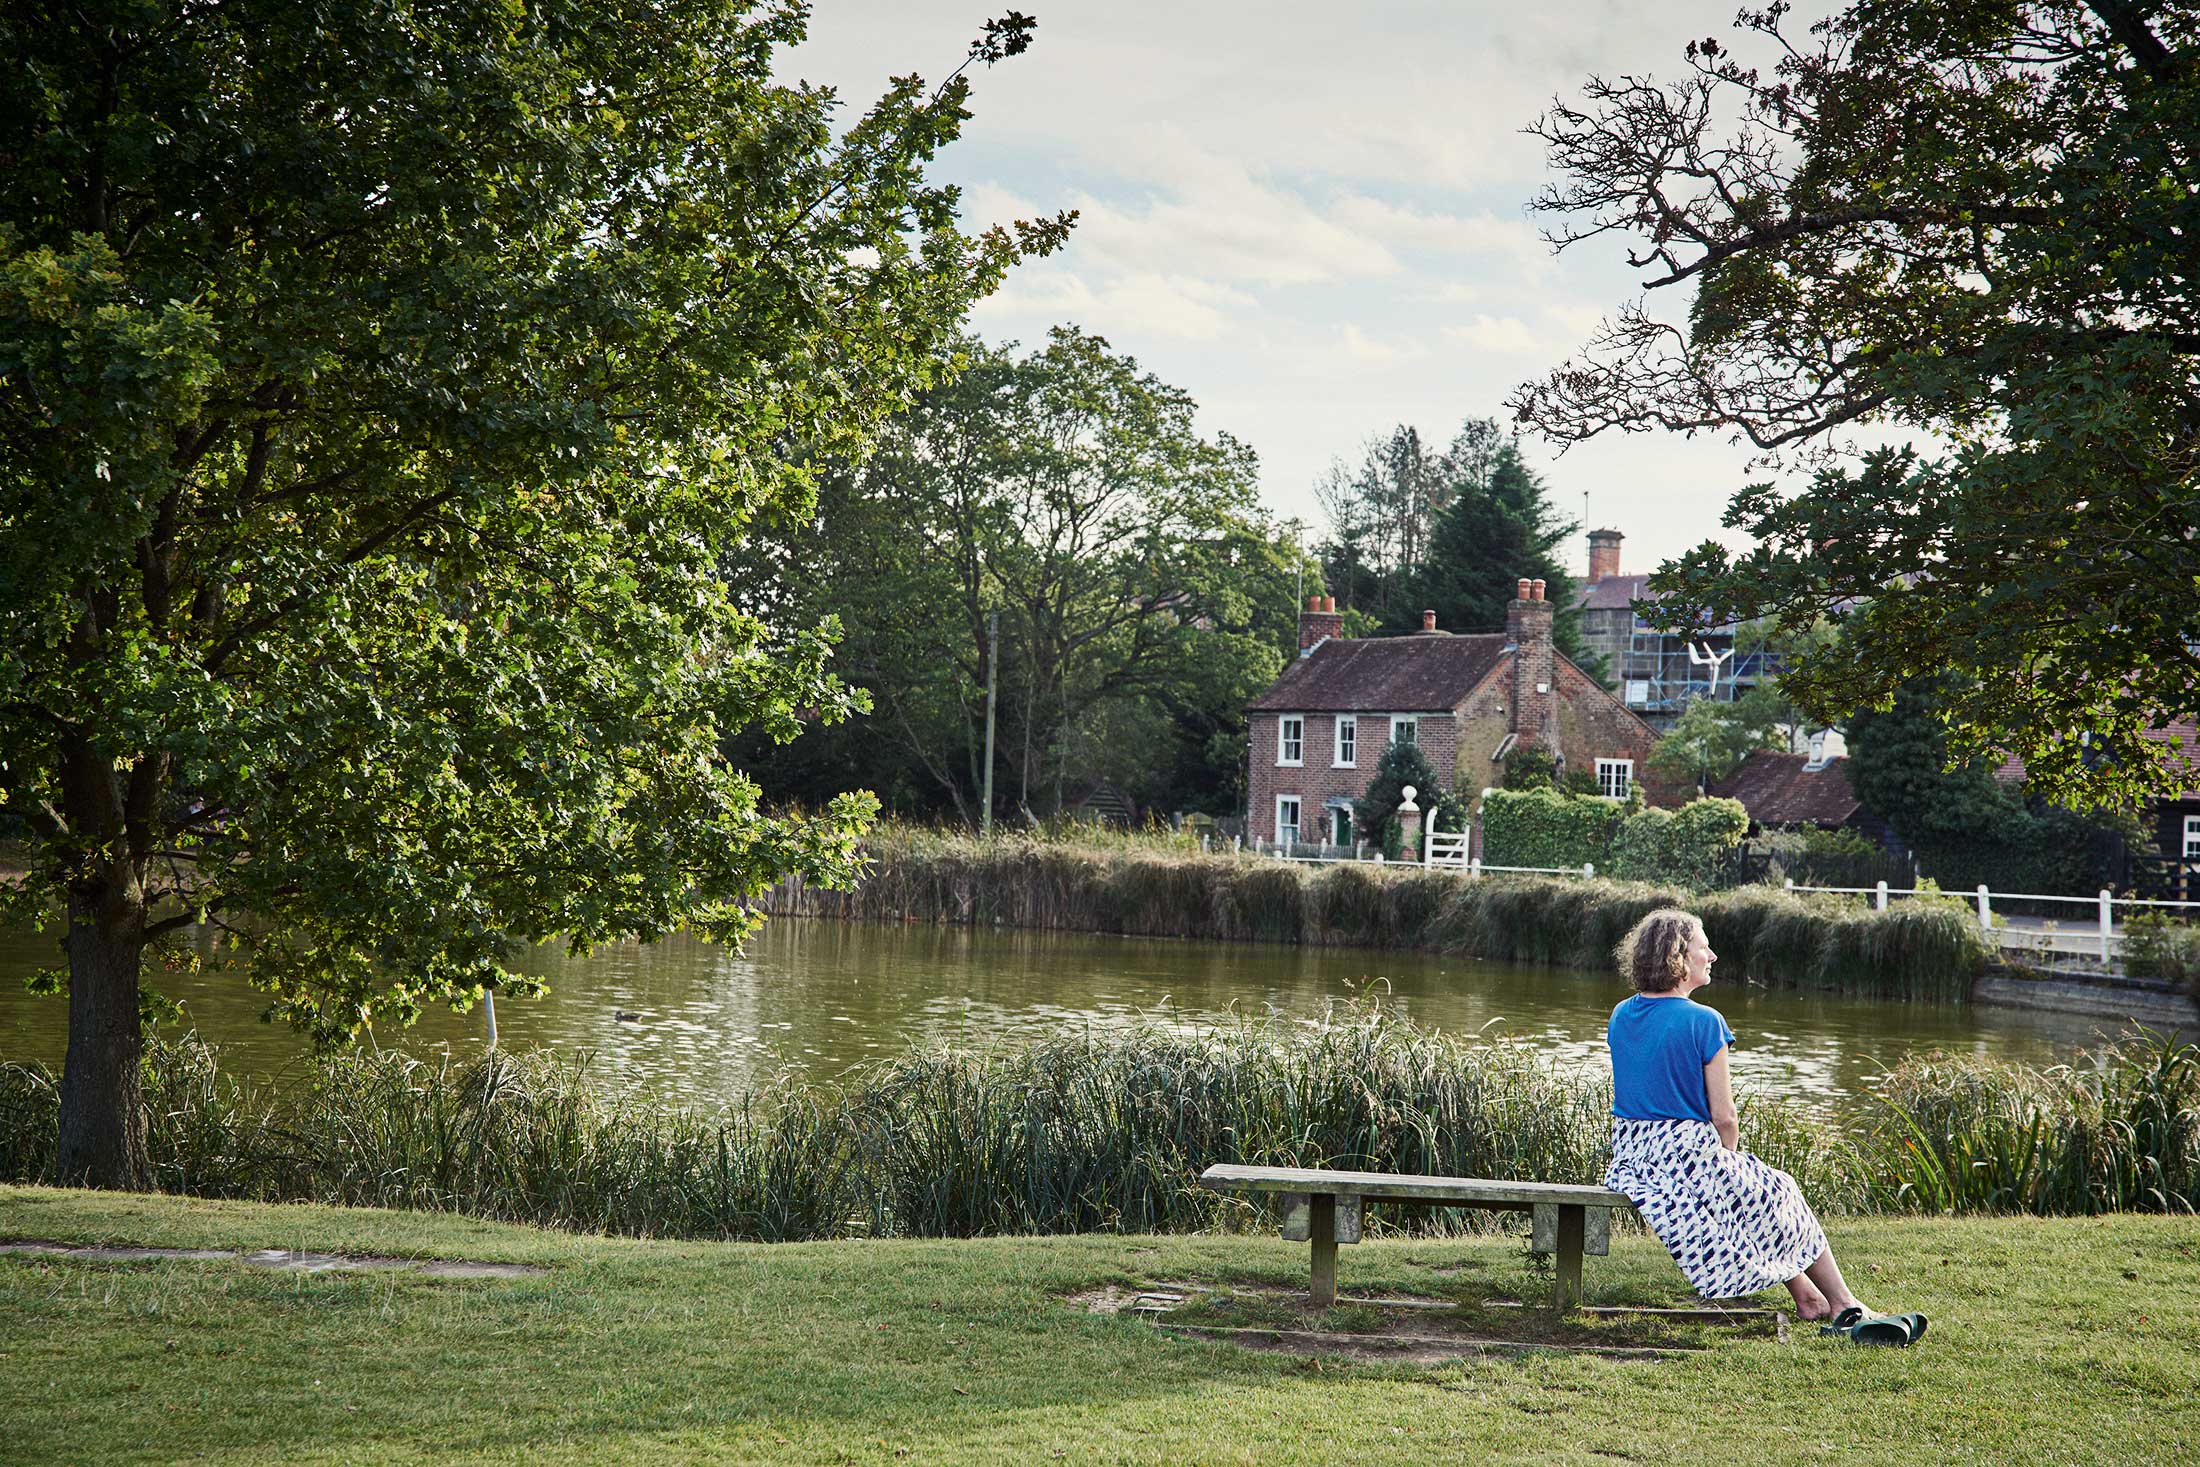 Woman sat on bench by river - Shenfield - Beresfords Estate agents - Essex